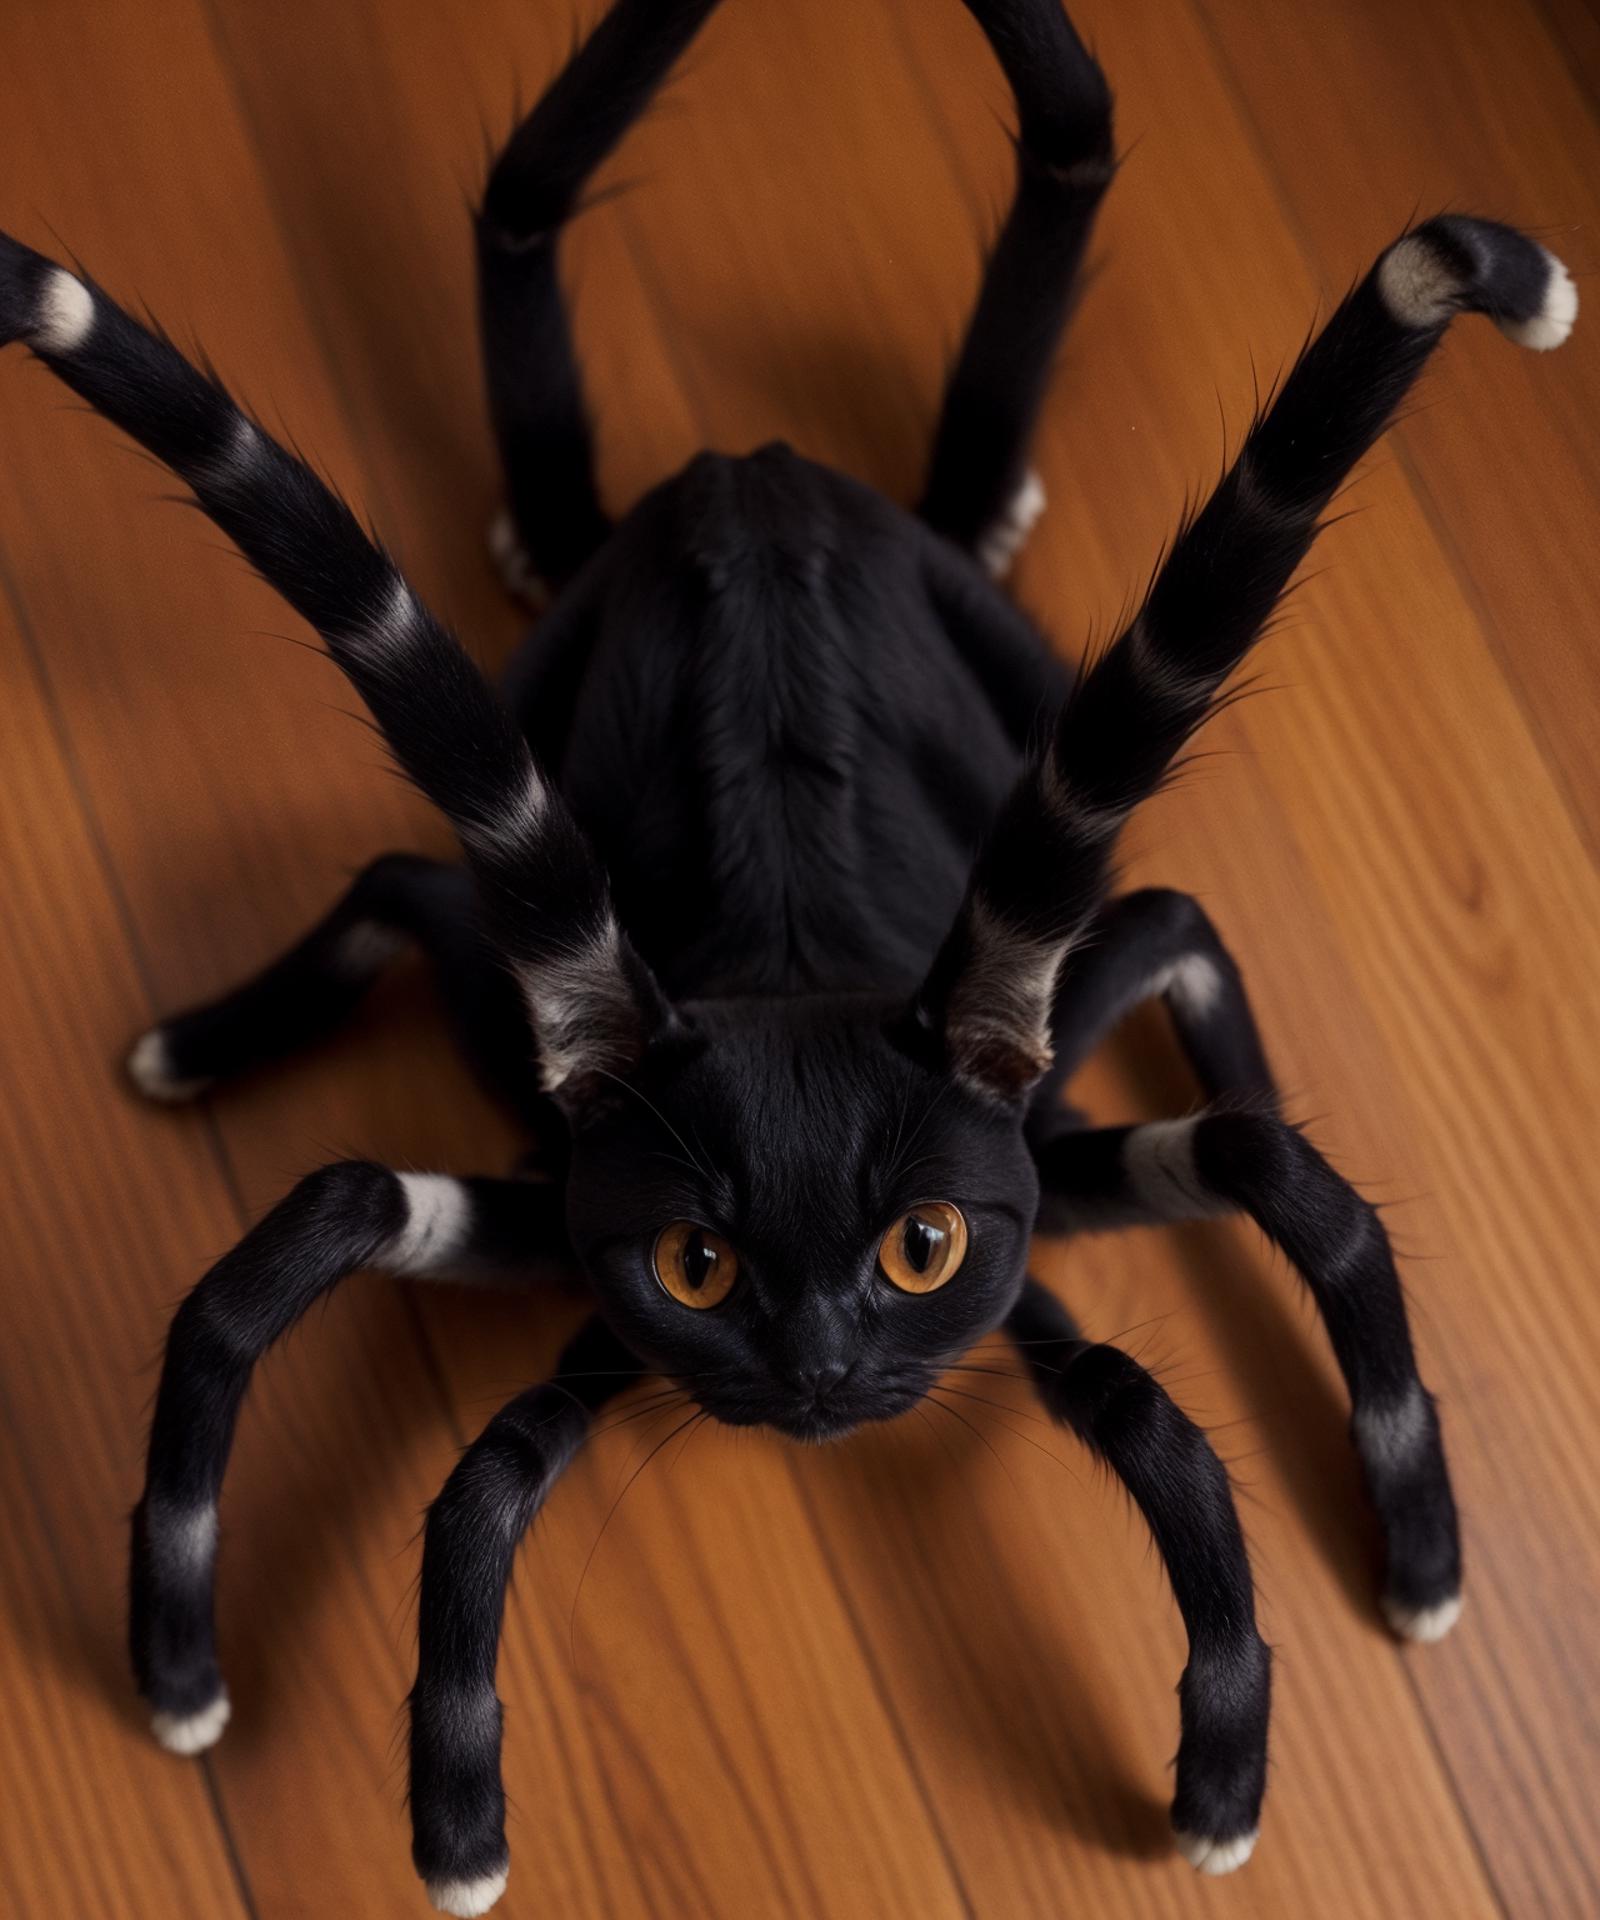 A spider cat toy on a wooden floor.